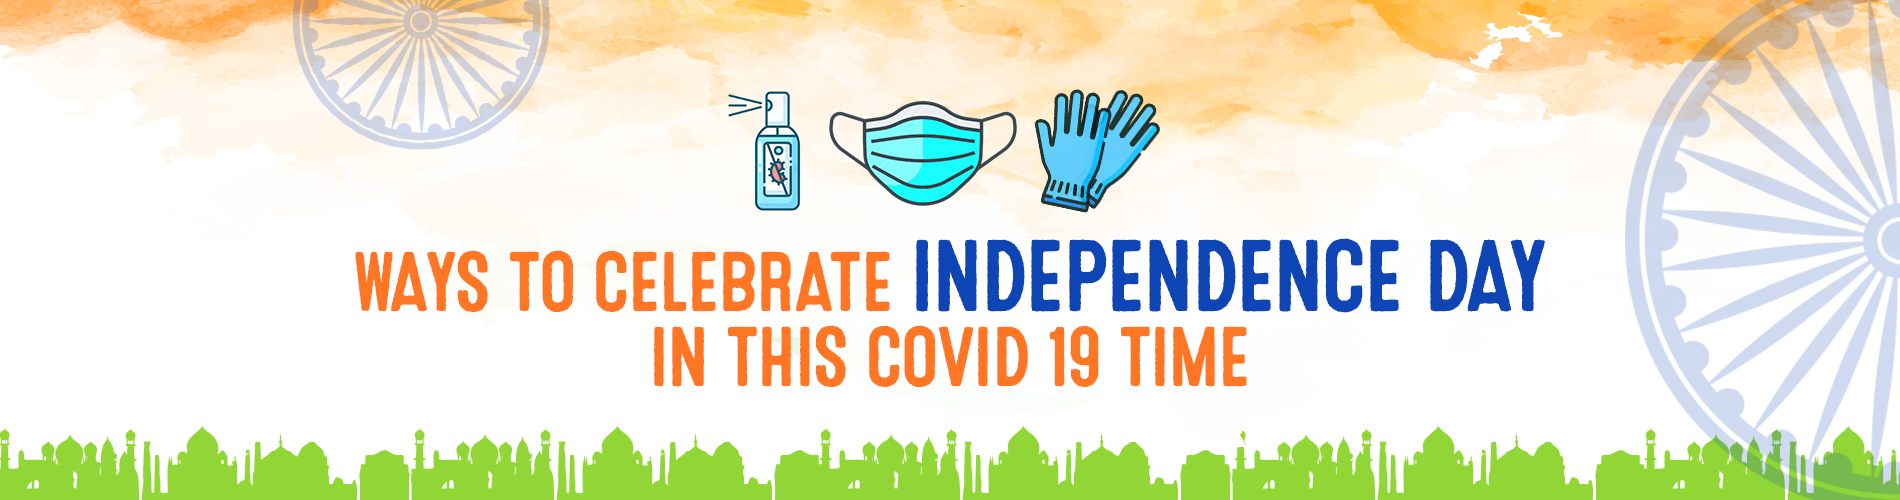 Ways to Celebrate Independence Day in Covid 19 Time